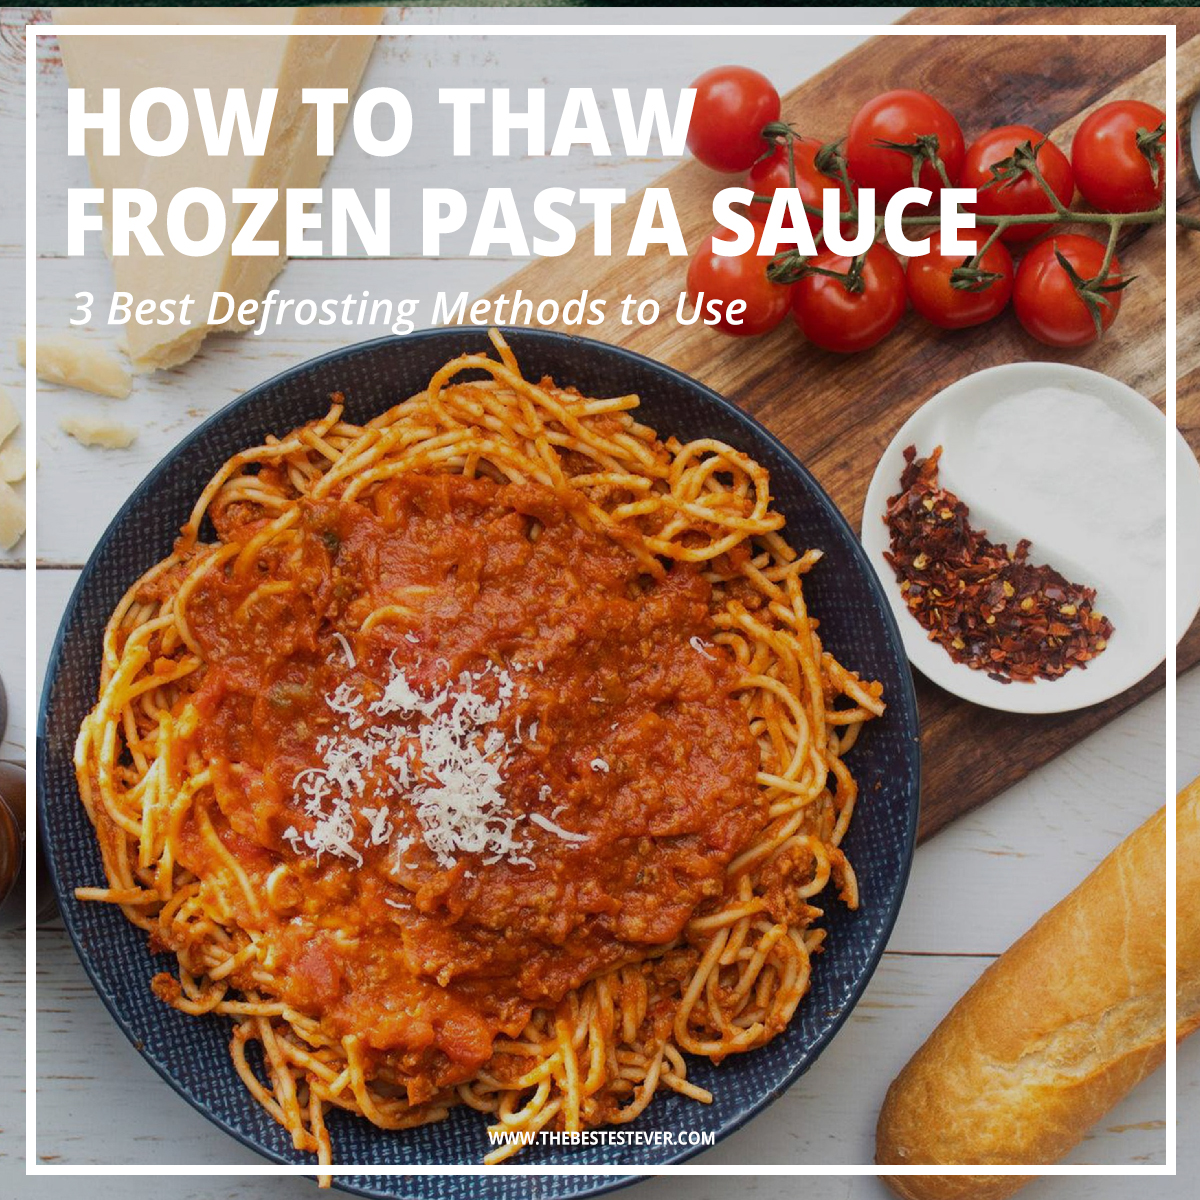 How to Thaw Frozen Pasta Sauce